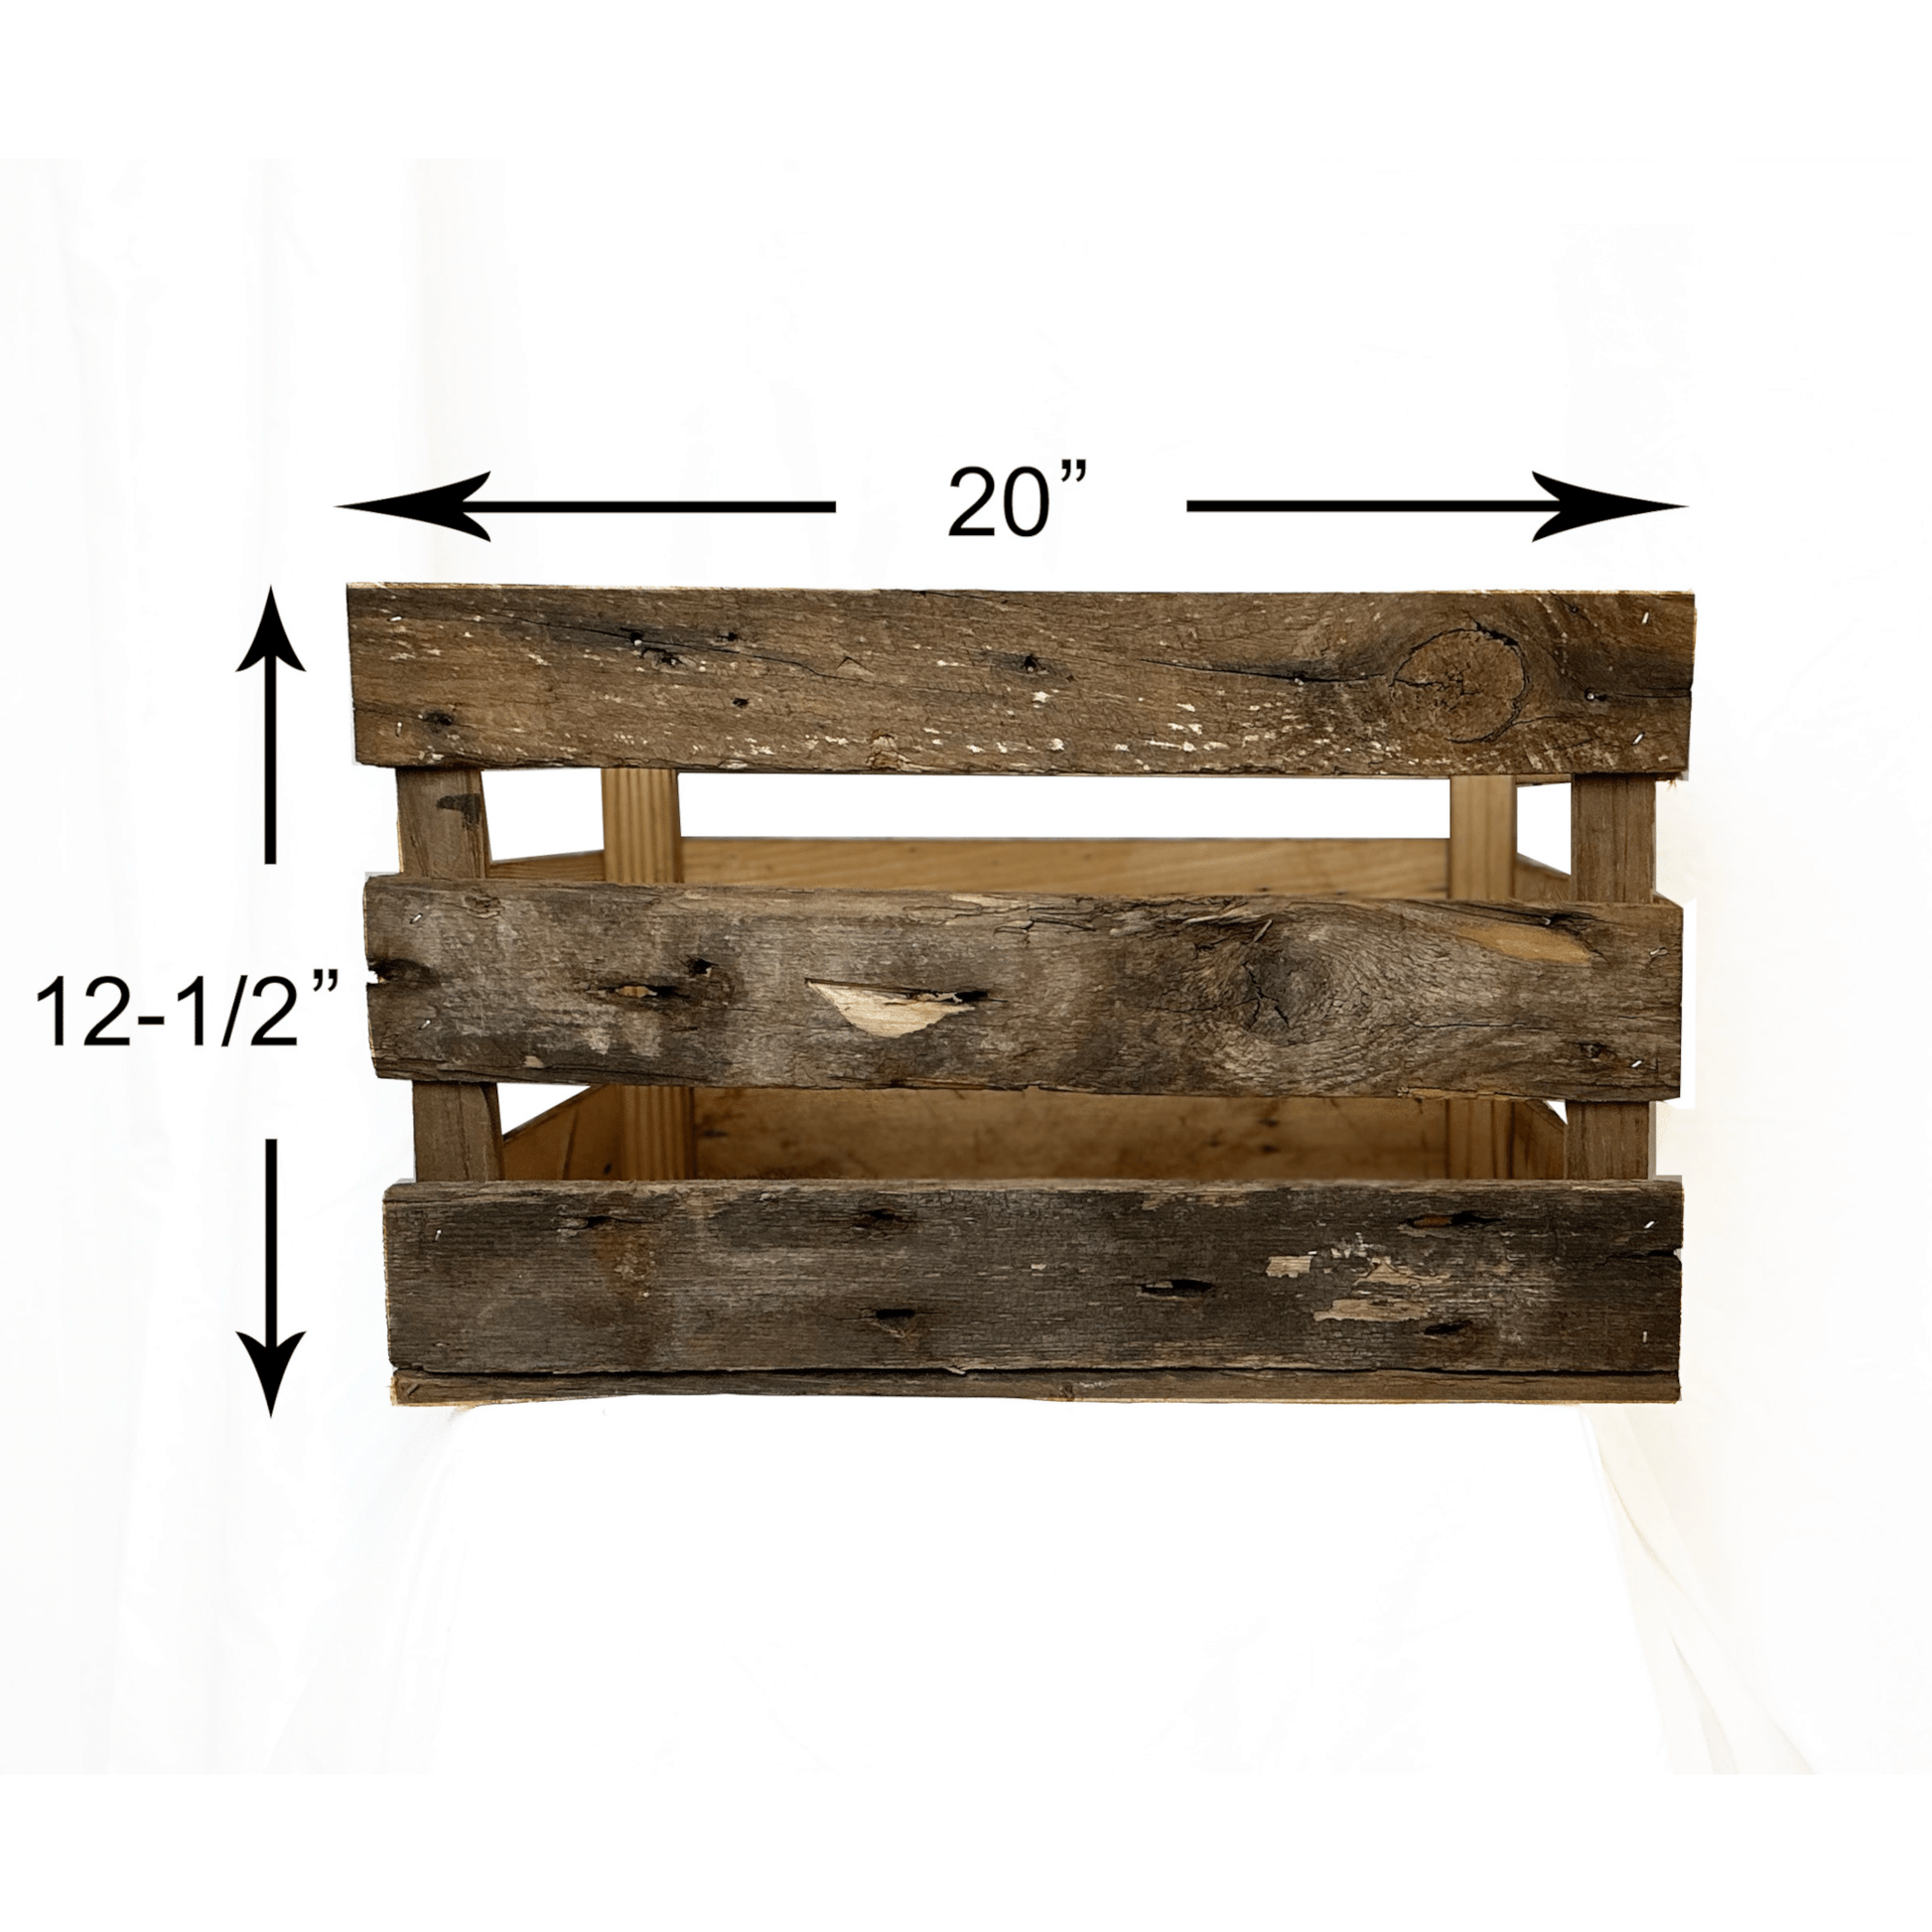 the side of a large wooden crate. Text across top shows twenty inches and text down shows twelve and a half inches. There are three slats with spaces in between.